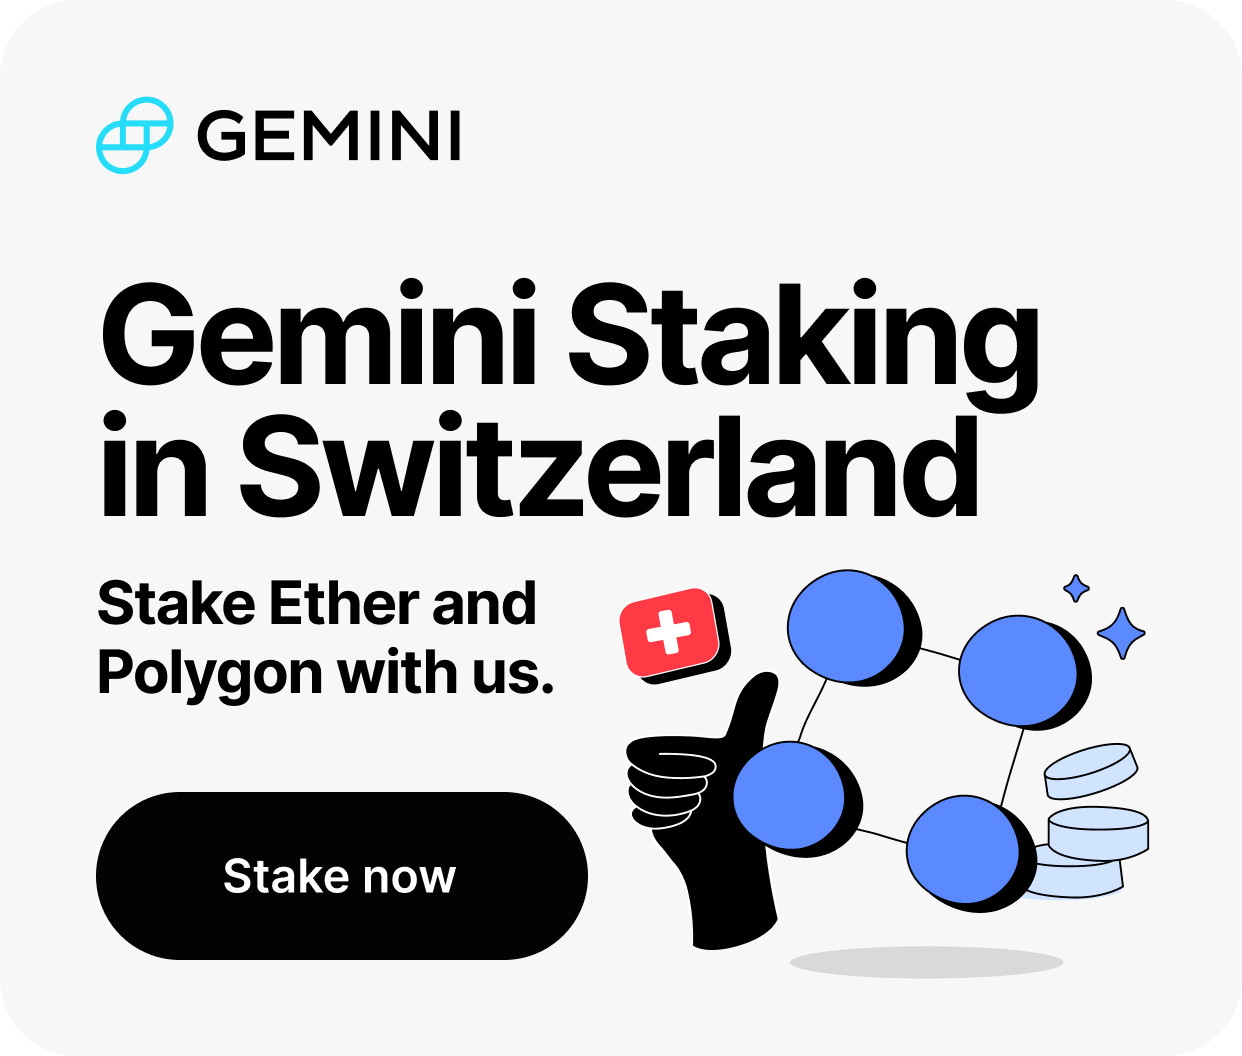 Gemini Staking is now available in Switzerland! 🇨🇭